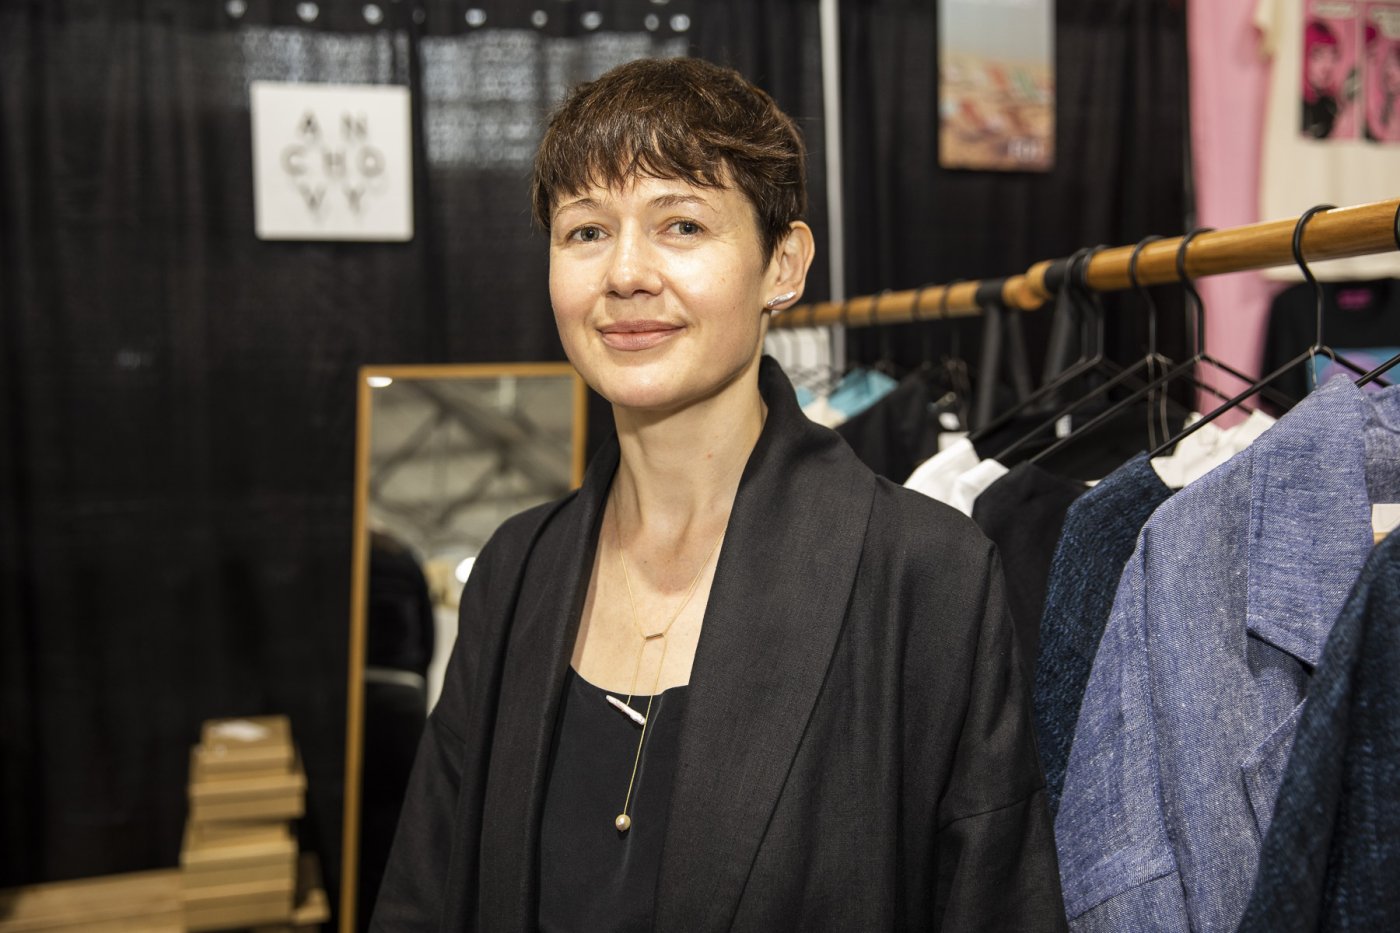 Artist Giedre Kose displays a necklace in her booth.